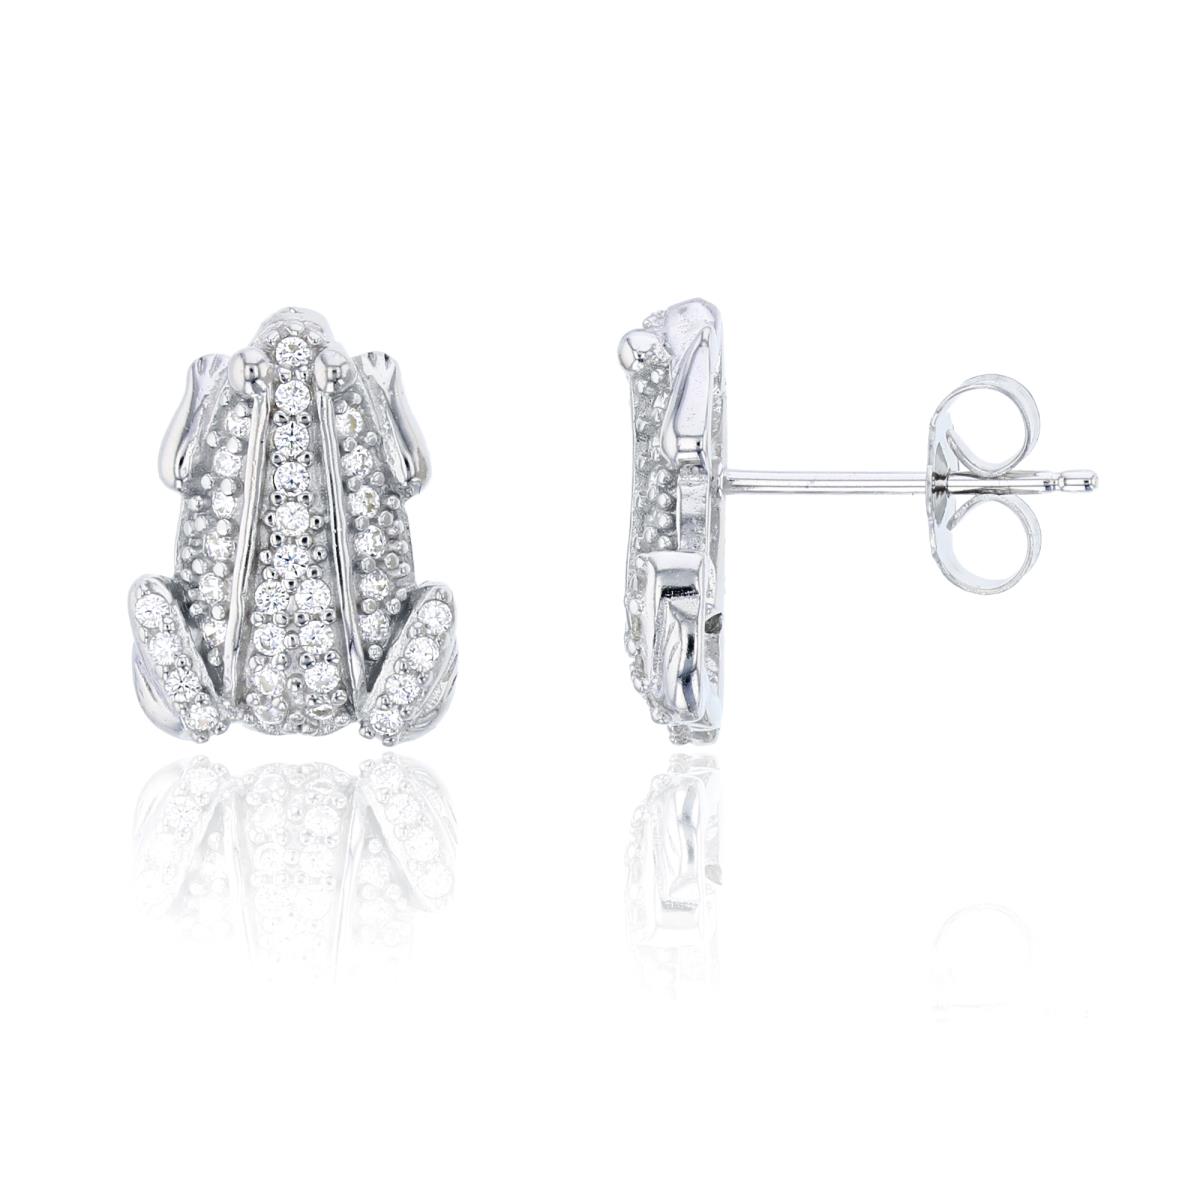 Sterling Silver 9.5x8mm Micropave Frog Stud Earring